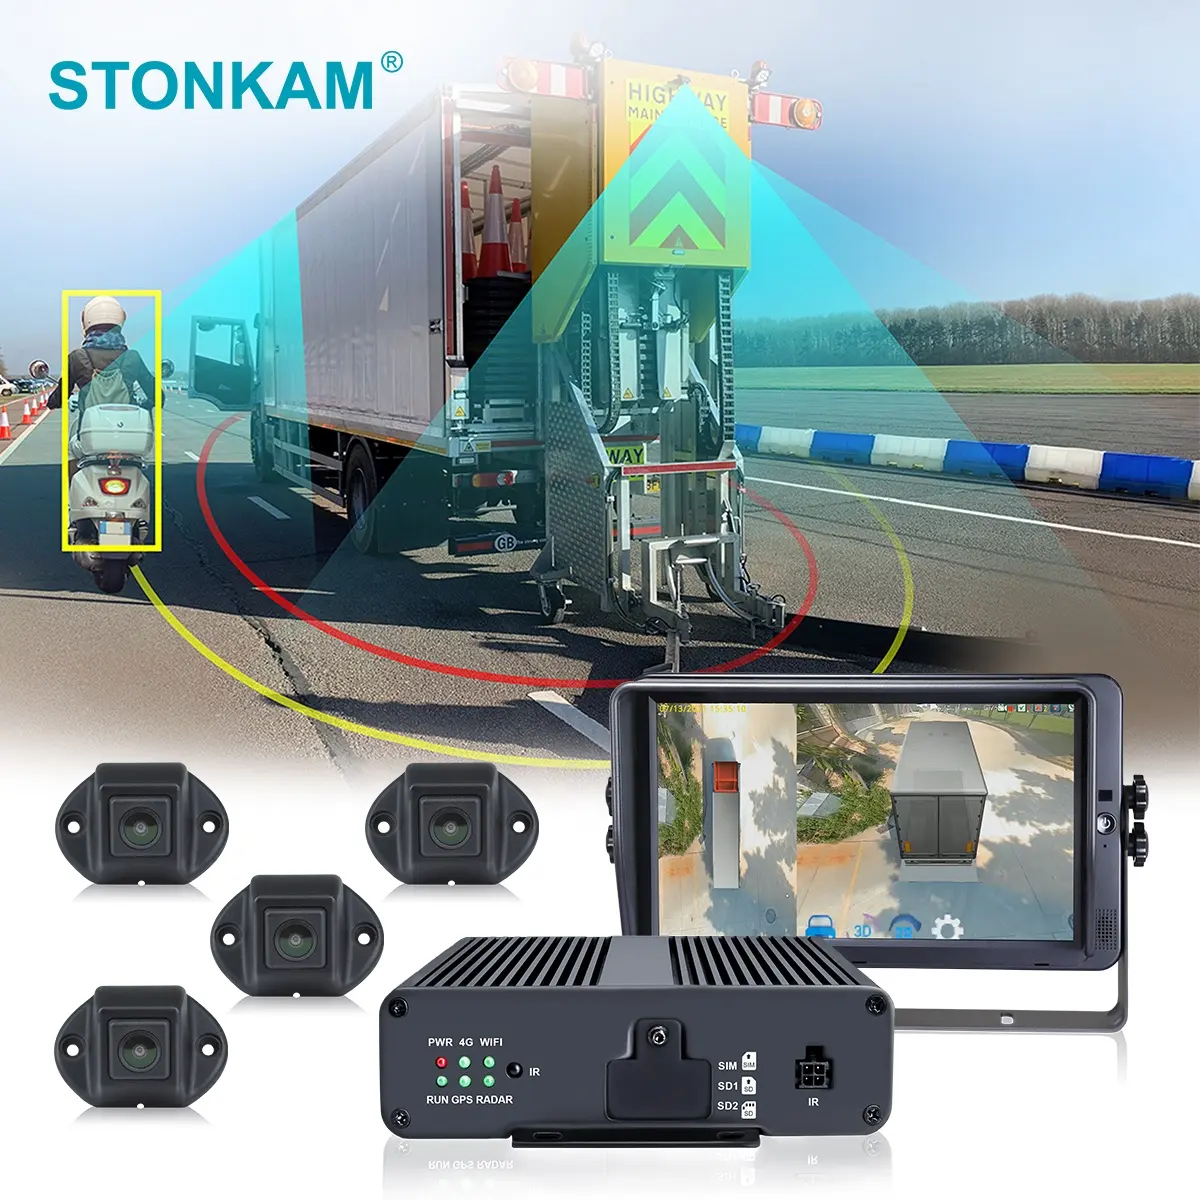 STONKAM 3D HD 360 degree truck surround view car camera monitoring system Heavy Duty Truck with parking sensor for school bus